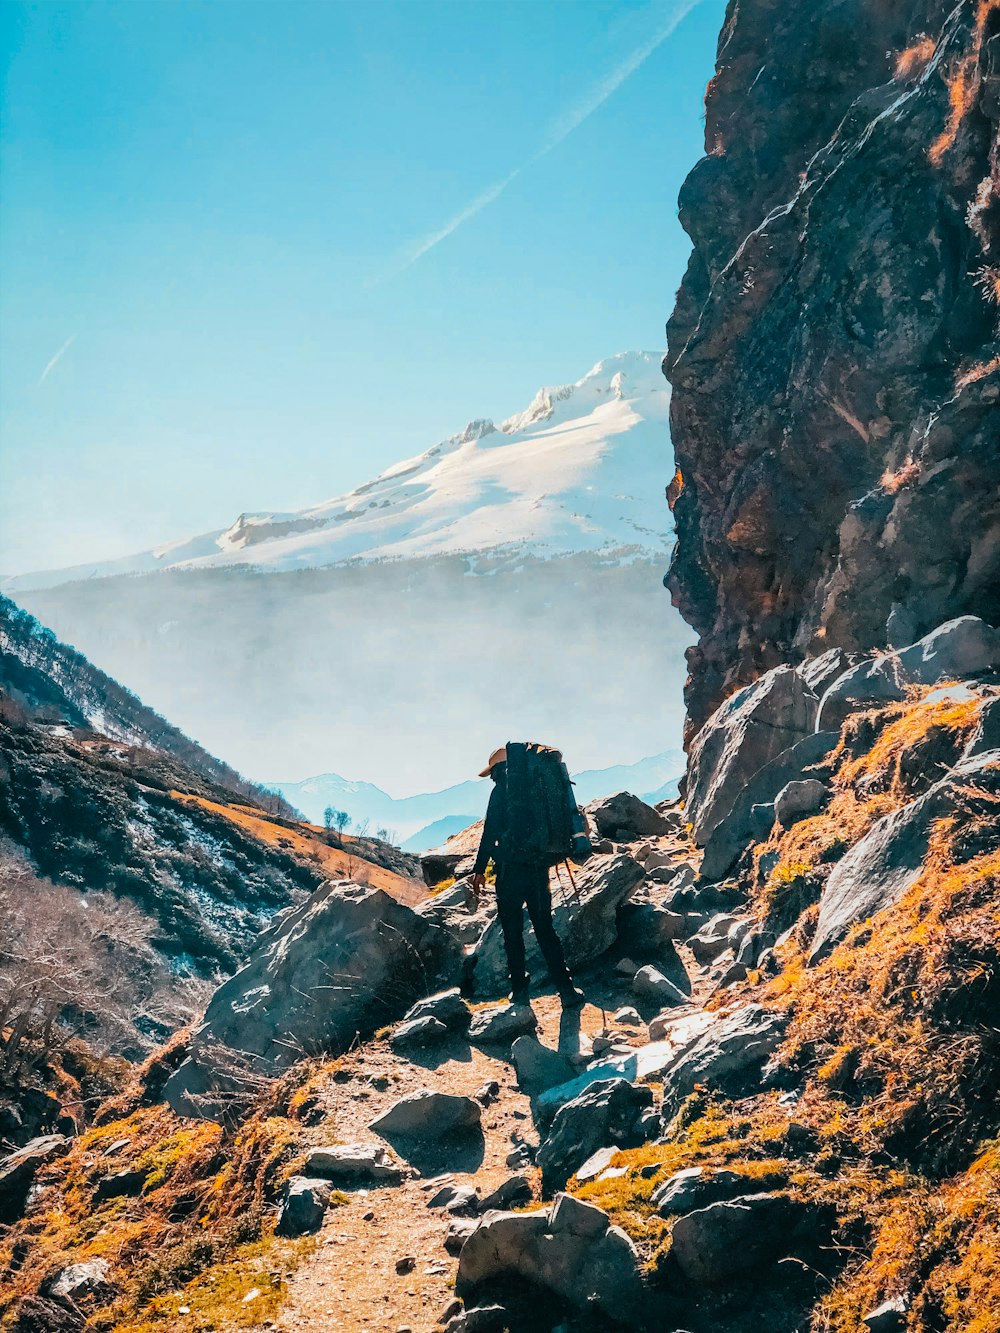 a person hiking up a rocky trail with a mountain in the background